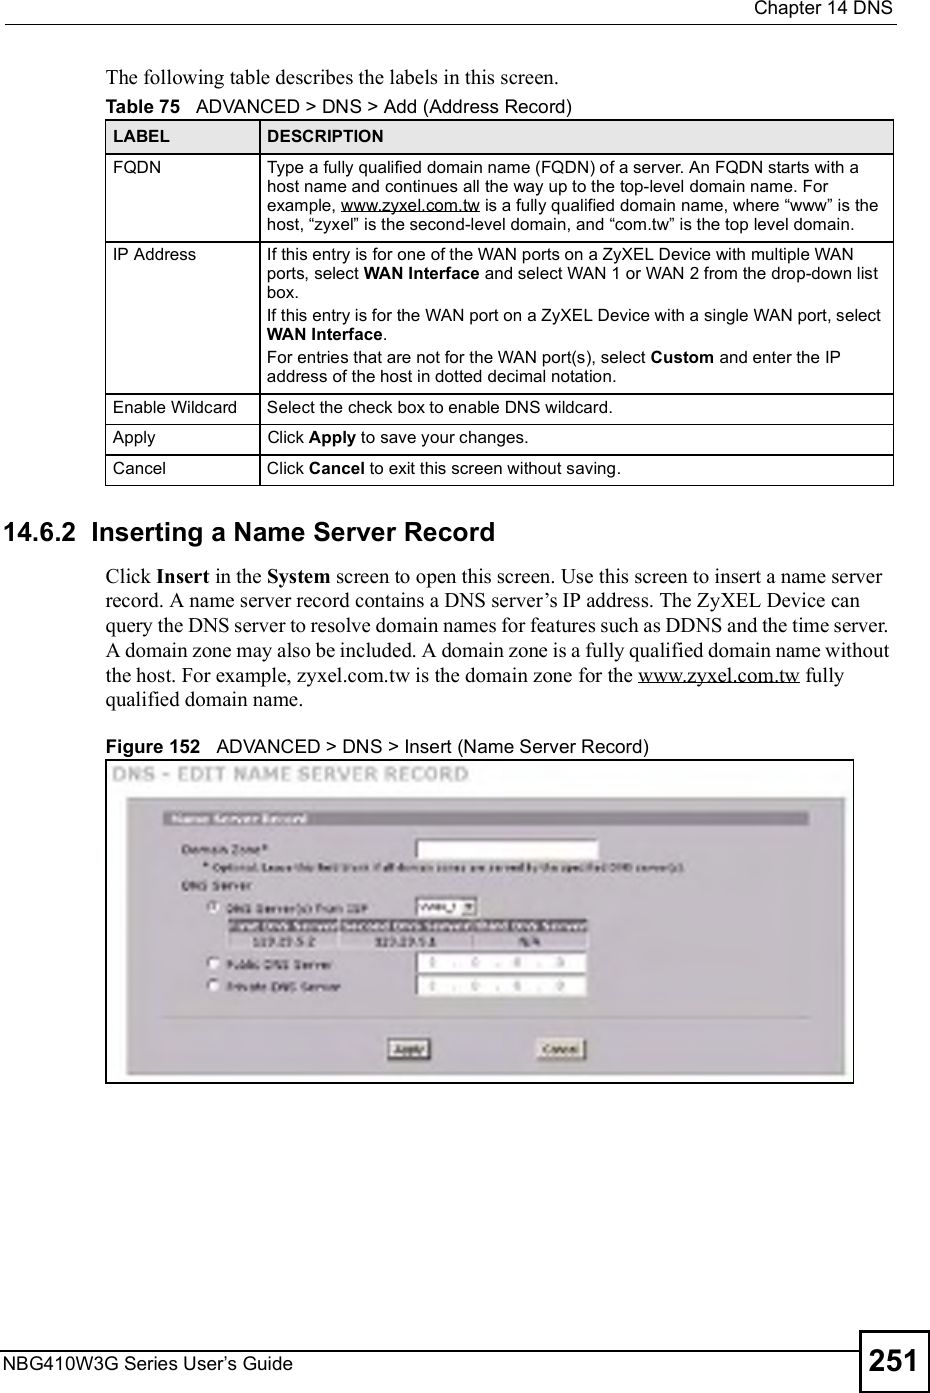  Chapter 14DNSNBG410W3G Series User s Guide 251The following table describes the labels in this screen.  14.6.2  Inserting a Name Server Record  Click Insert in the System screen to open this screen. Use this screen to insert a name server record. A name server record contains a DNS server!s IP address. The ZyXEL Device can query the DNS server to resolve domain names for features such as DDNS and the time server. A domain zone may also be included. A domain zone is a fully qualified domain name without the host. For example, zyxel.com.tw is the domain zone for the www.zyxel.com.tw fully qualified domain name.  Figure 152   ADVANCED &gt; DNS &gt; Insert (Name Server Record)Table 75   ADVANCED &gt; DNS &gt; Add (Address Record)LABEL DESCRIPTIONFQDNType a fully qualified domain name (FQDN) of a server. An FQDN starts with a host name and continues all the way up to the top-level domain name. For example, www.zyxel.com.tw is a fully qualified domain name, where &quot;www# is the host, &quot;zyxel# is the second-level domain, and &quot;com.tw# is the top level domain. IP AddressIf this entry is for one of the WAN ports on a ZyXEL Device with multiple WAN ports, select WAN Interface and select WAN 1 or WAN 2 from the drop-down list box.If this entry is for the WAN port on a ZyXEL Device with a single WAN port, select WAN Interface.For entries that are not for the WAN port(s), select Custom and enter the IP address of the host in dotted decimal notation.Enable WildcardSelect the check box to enable DNS wildcard.ApplyClick Apply to save your changes.CancelClick Cancel to exit this screen without saving.